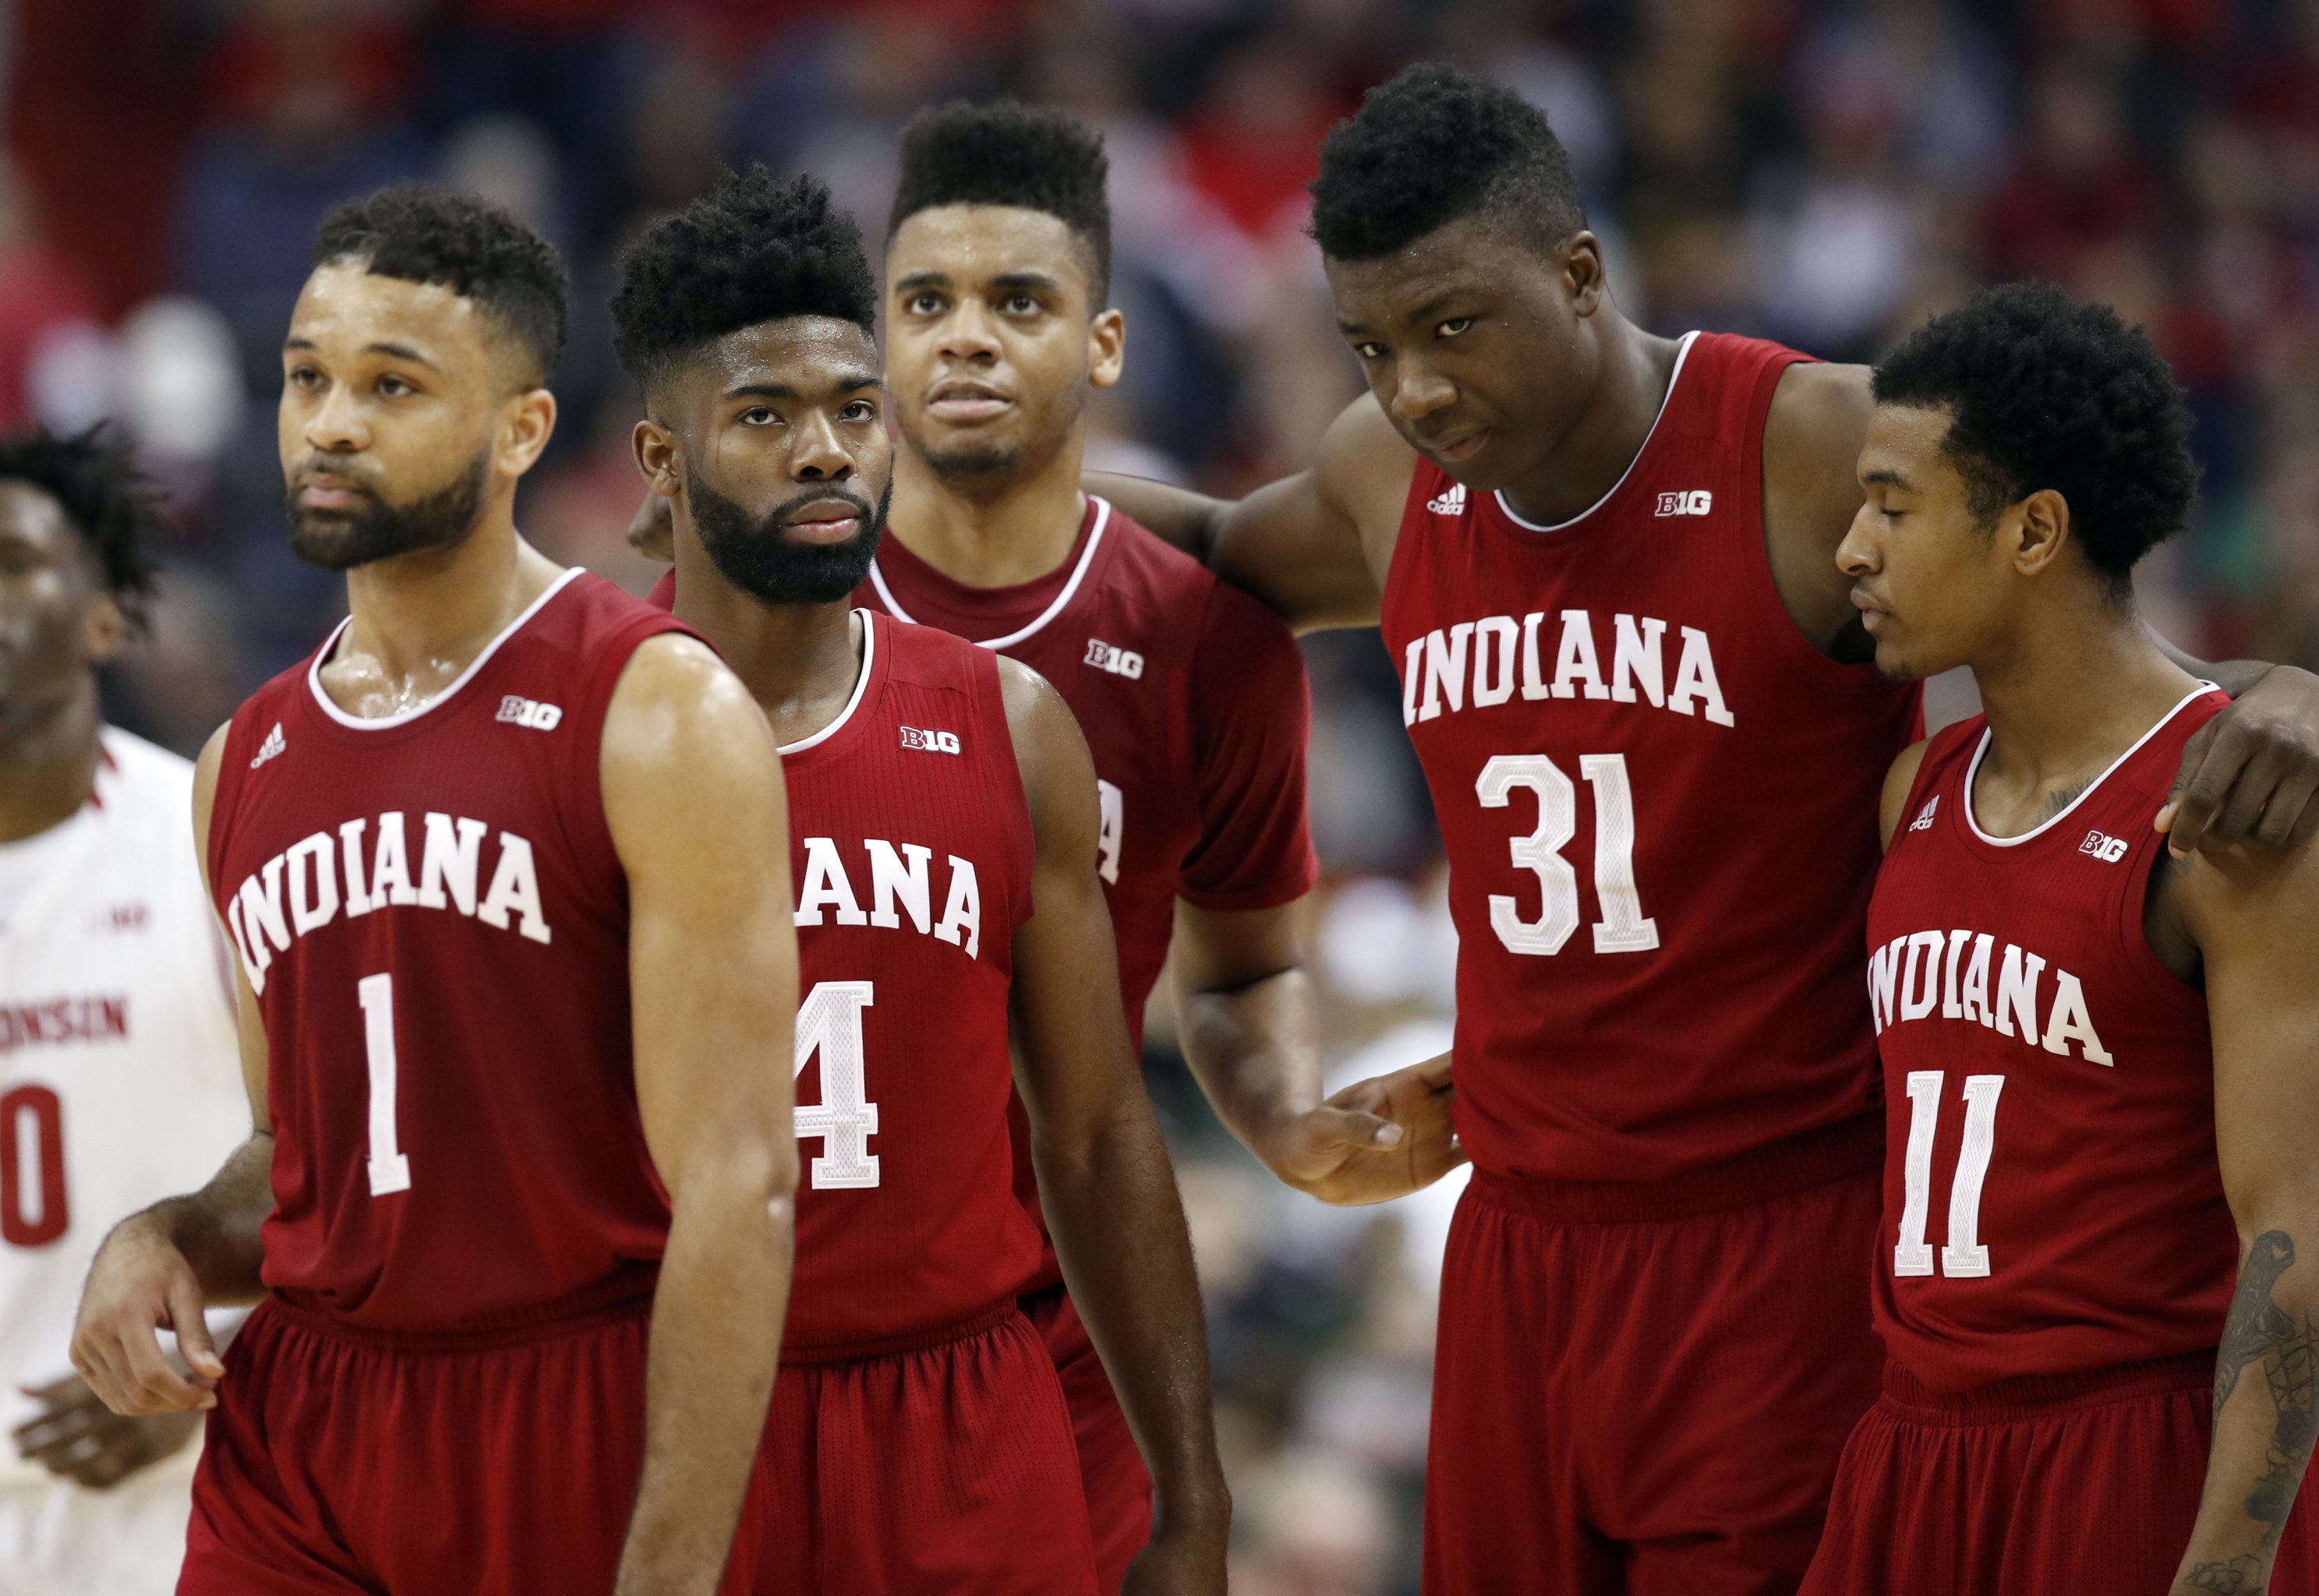 Reports: Indiana sophomore OG Anunoby will hire an agent - Inside the Hall